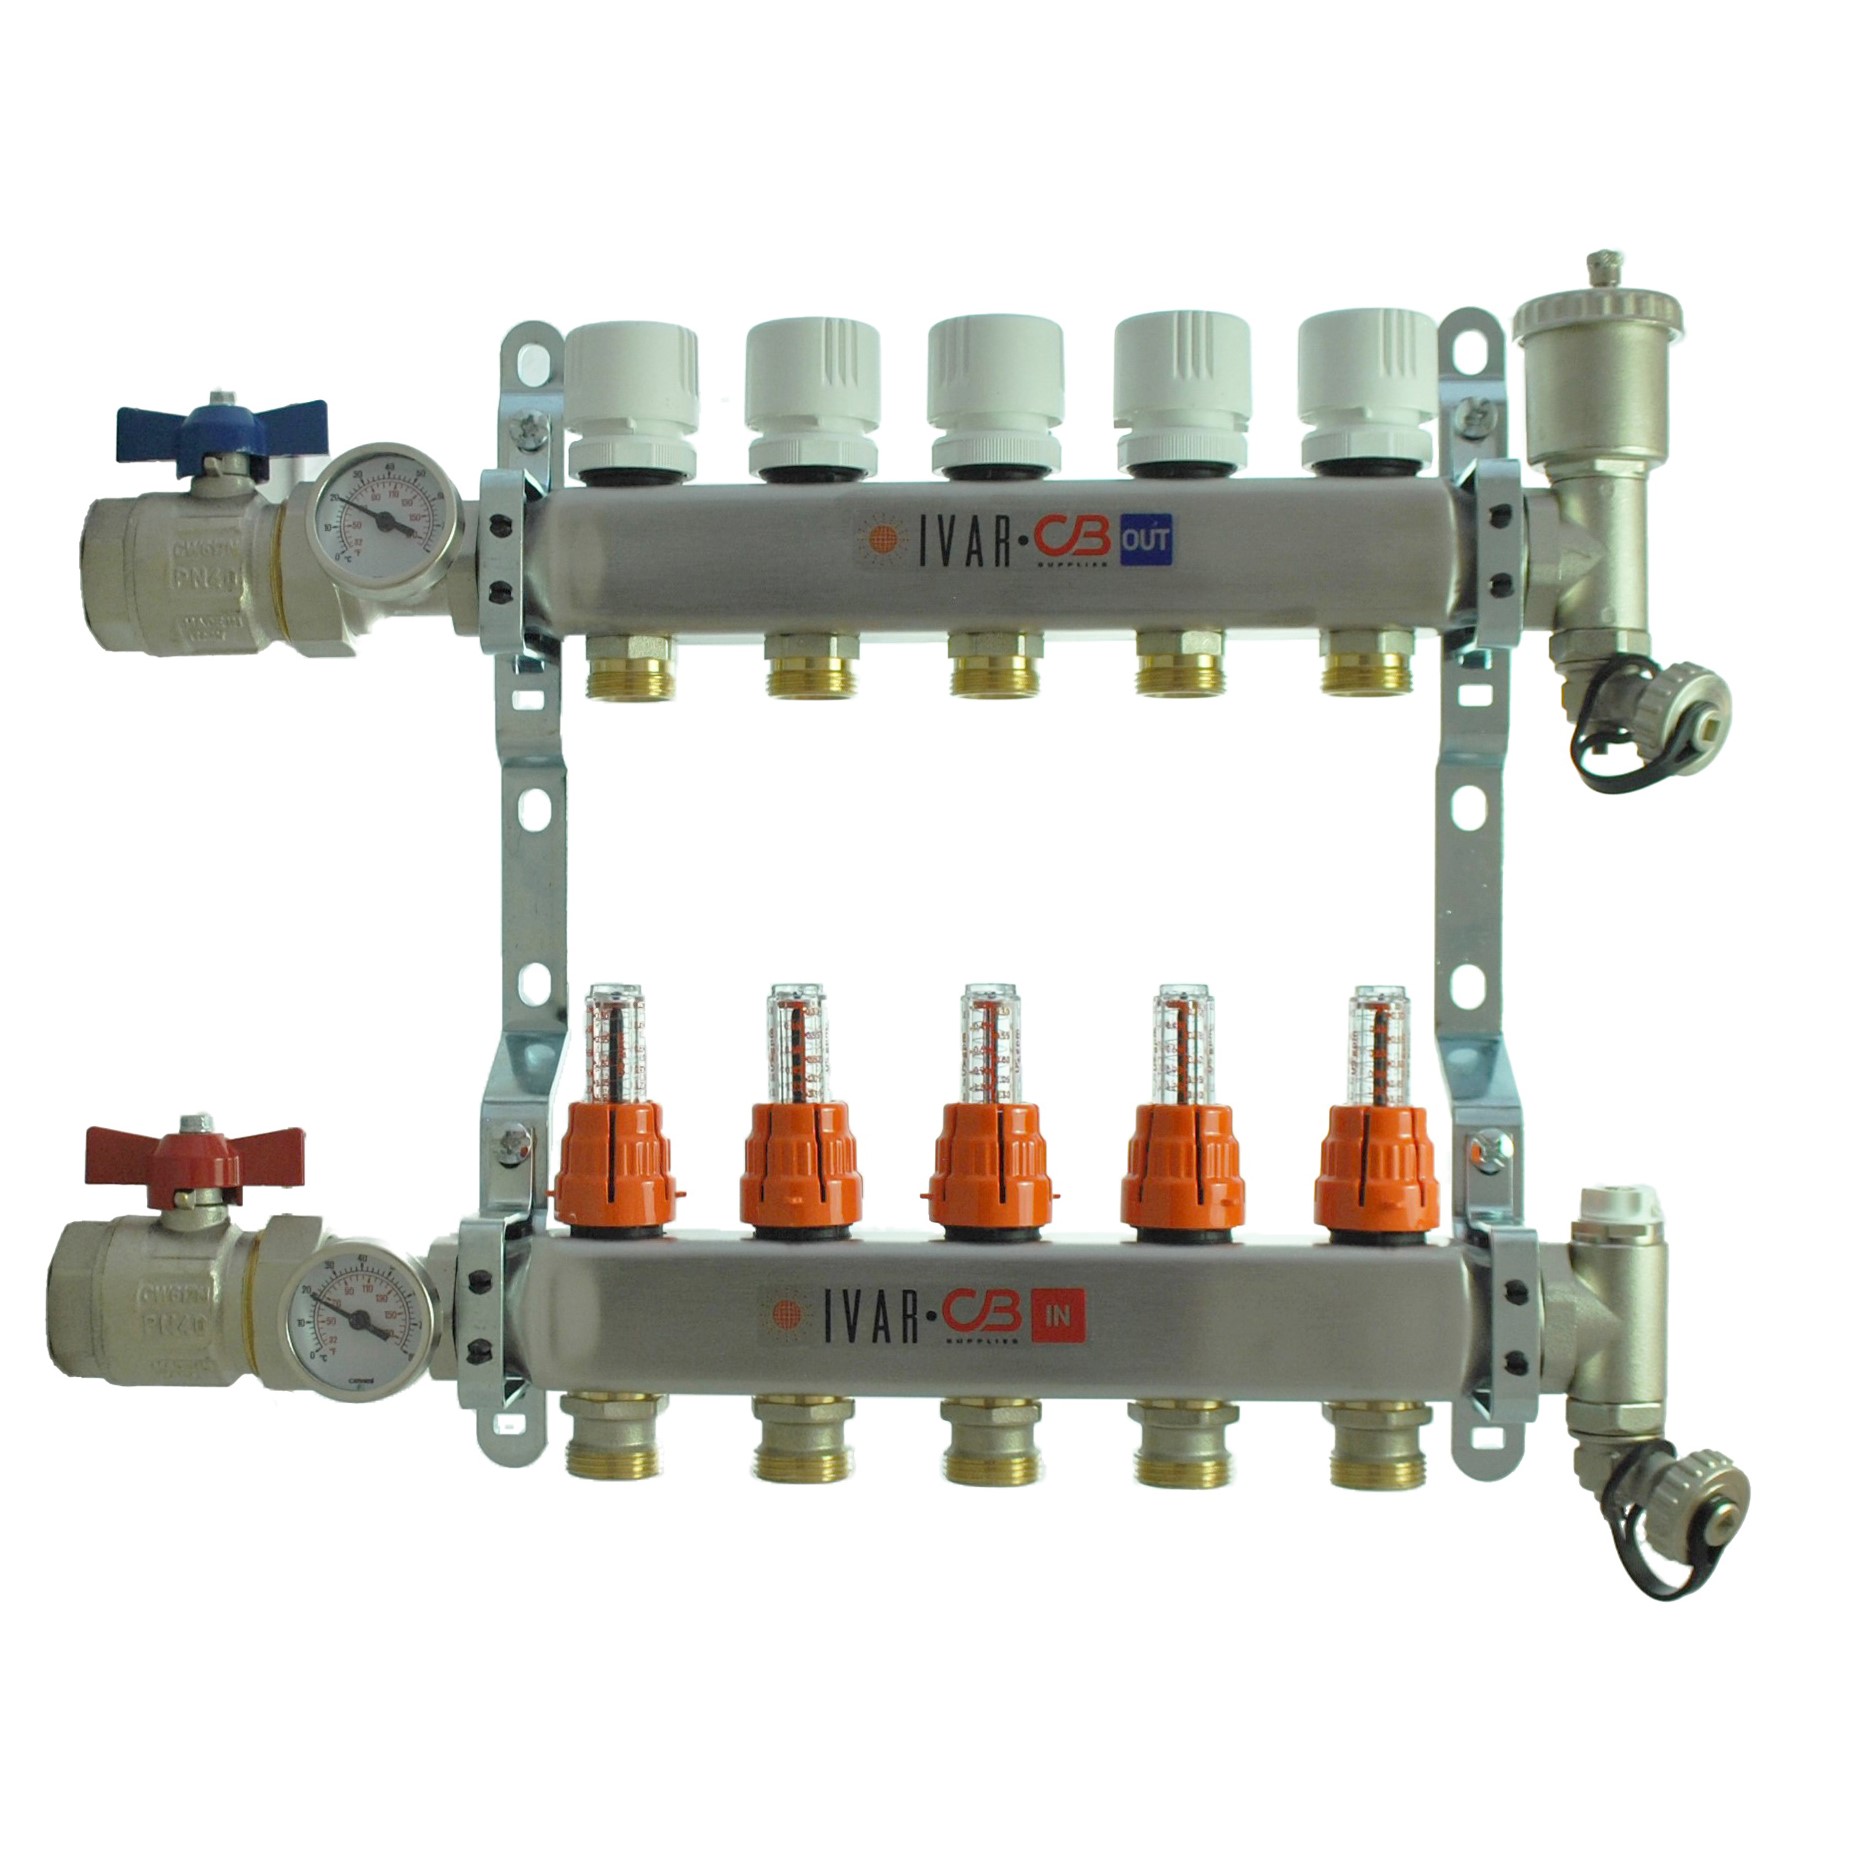 1" IVAR Stainless Steel Hydronic Manifold for Radiant Floor Heating - 5 ports